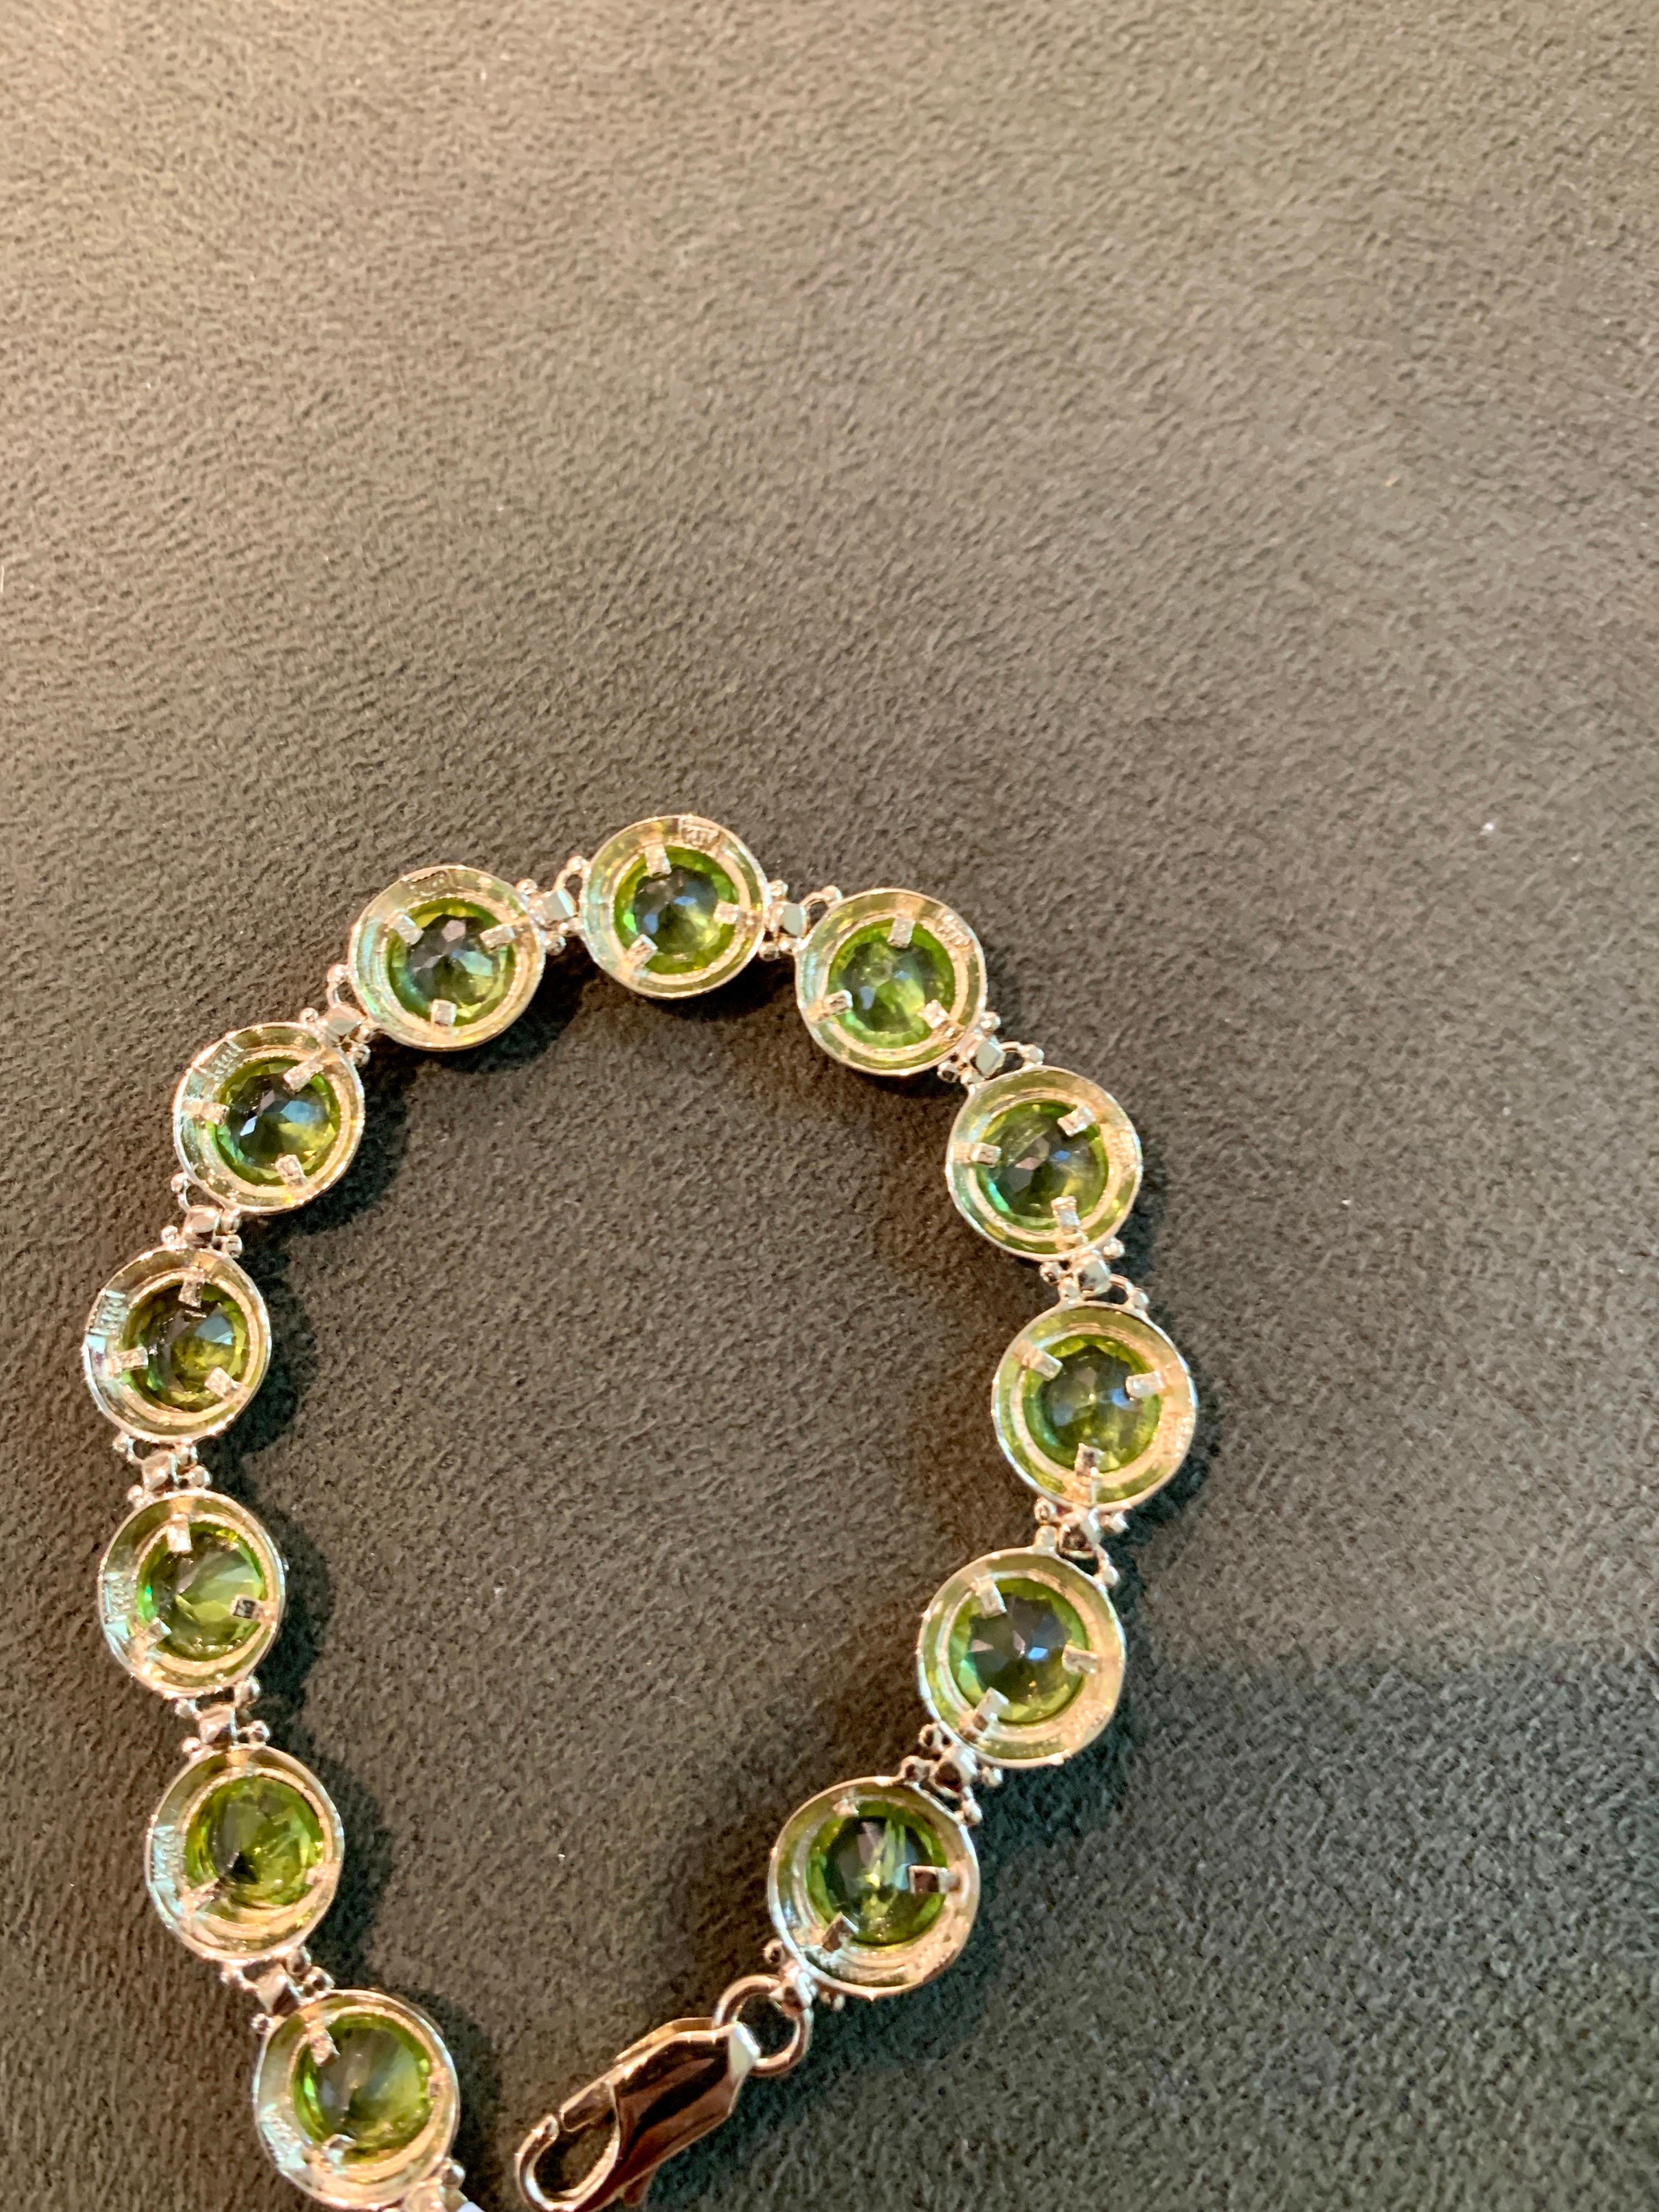 16 Carat Genuine Natural Peridot Tennis Bracelet 14 Karat Yellow Gold 16 Gram In New Condition For Sale In New York, NY